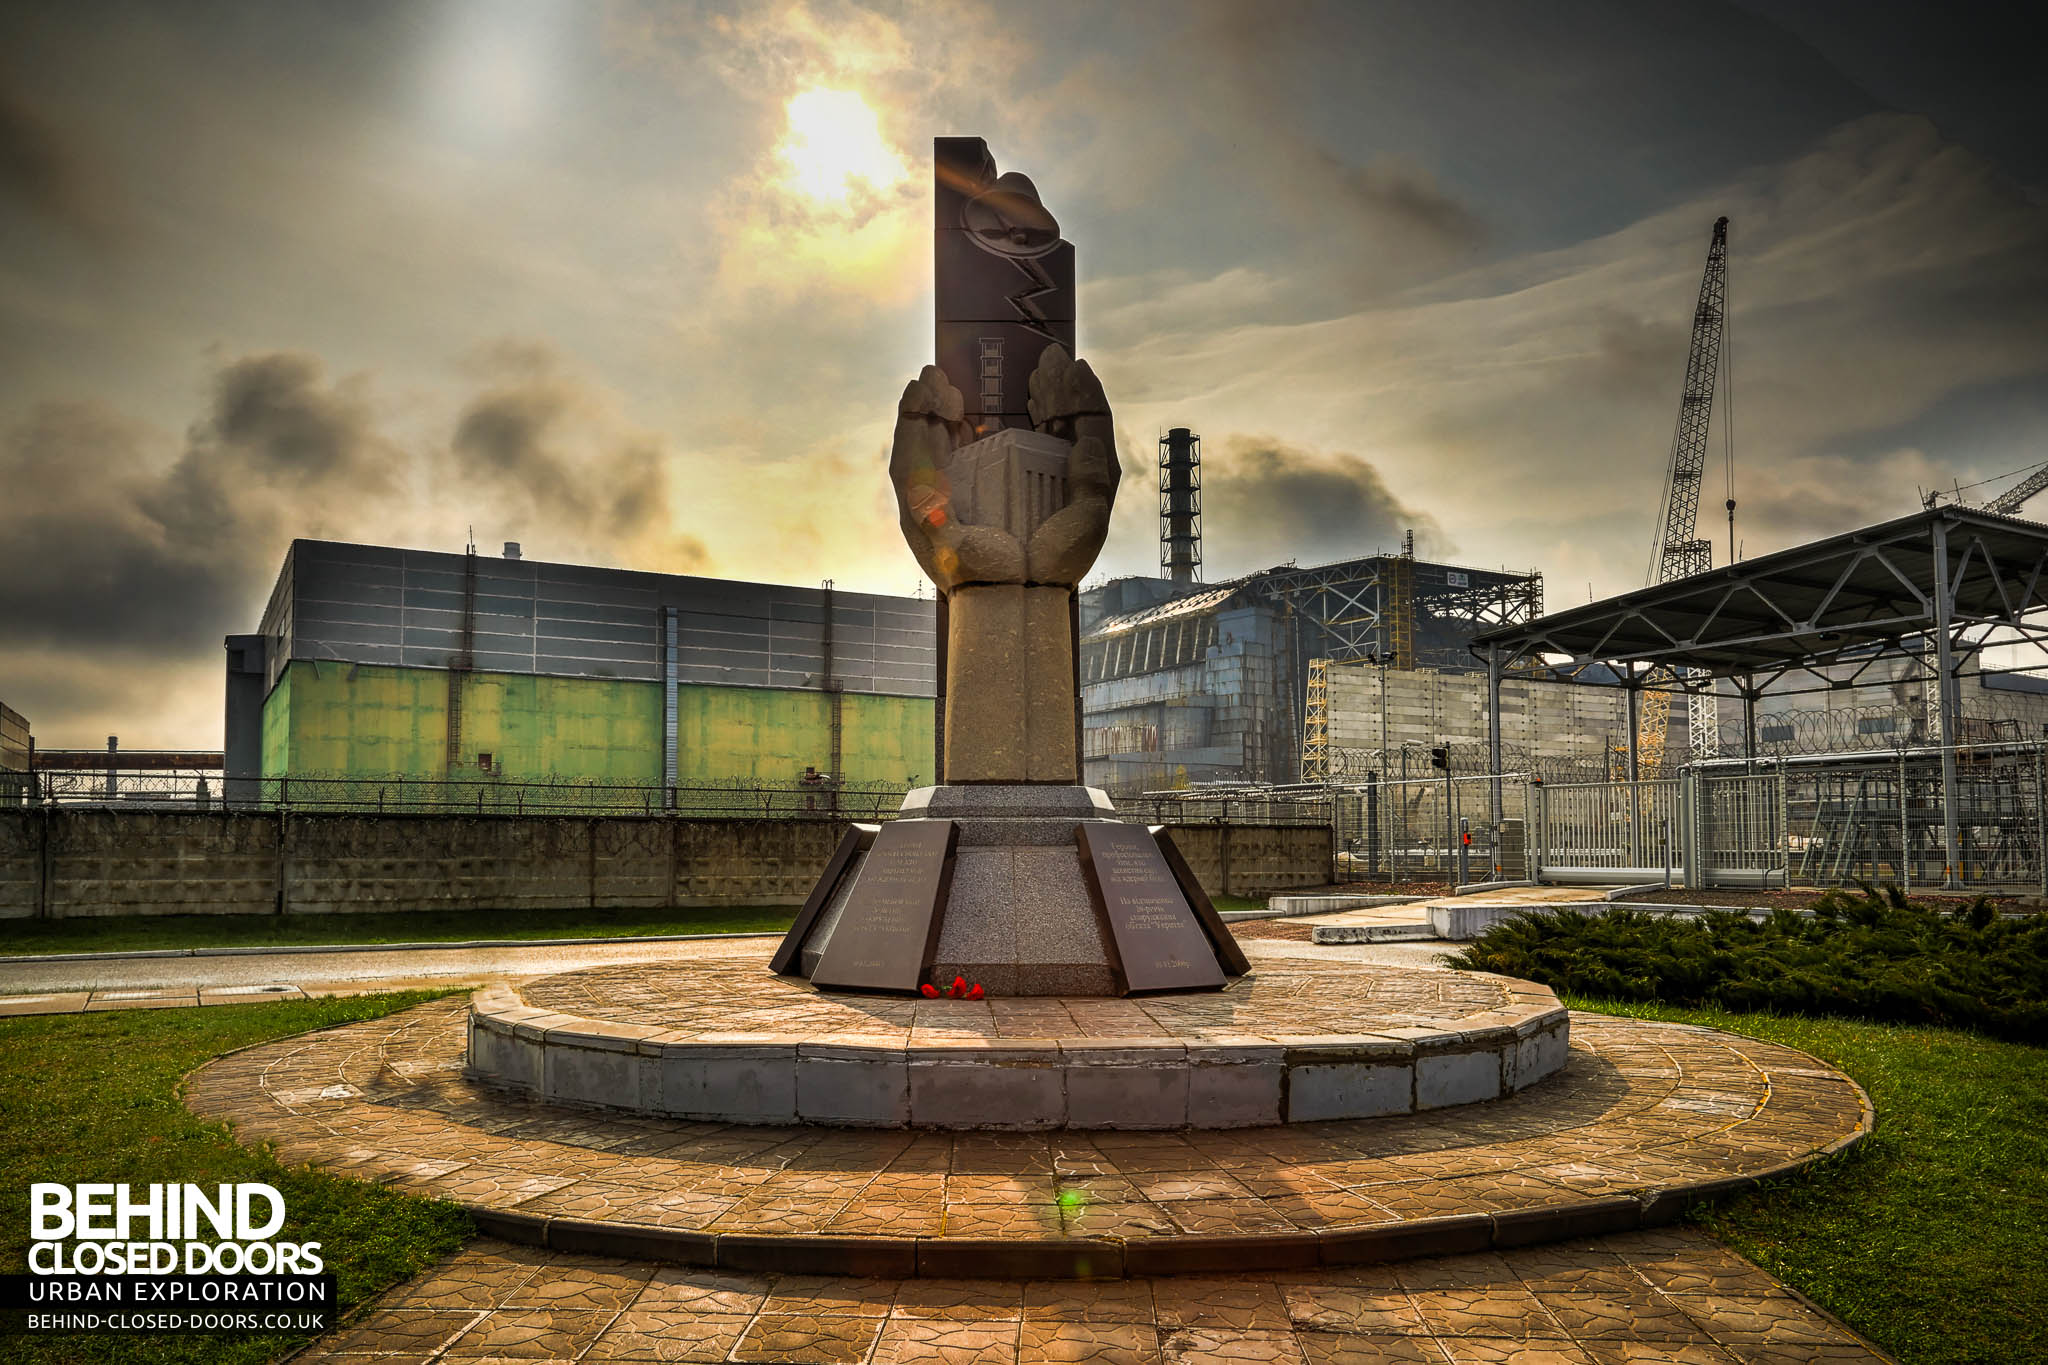 Chernobyl Nuclear Power Plant The monument commemorating